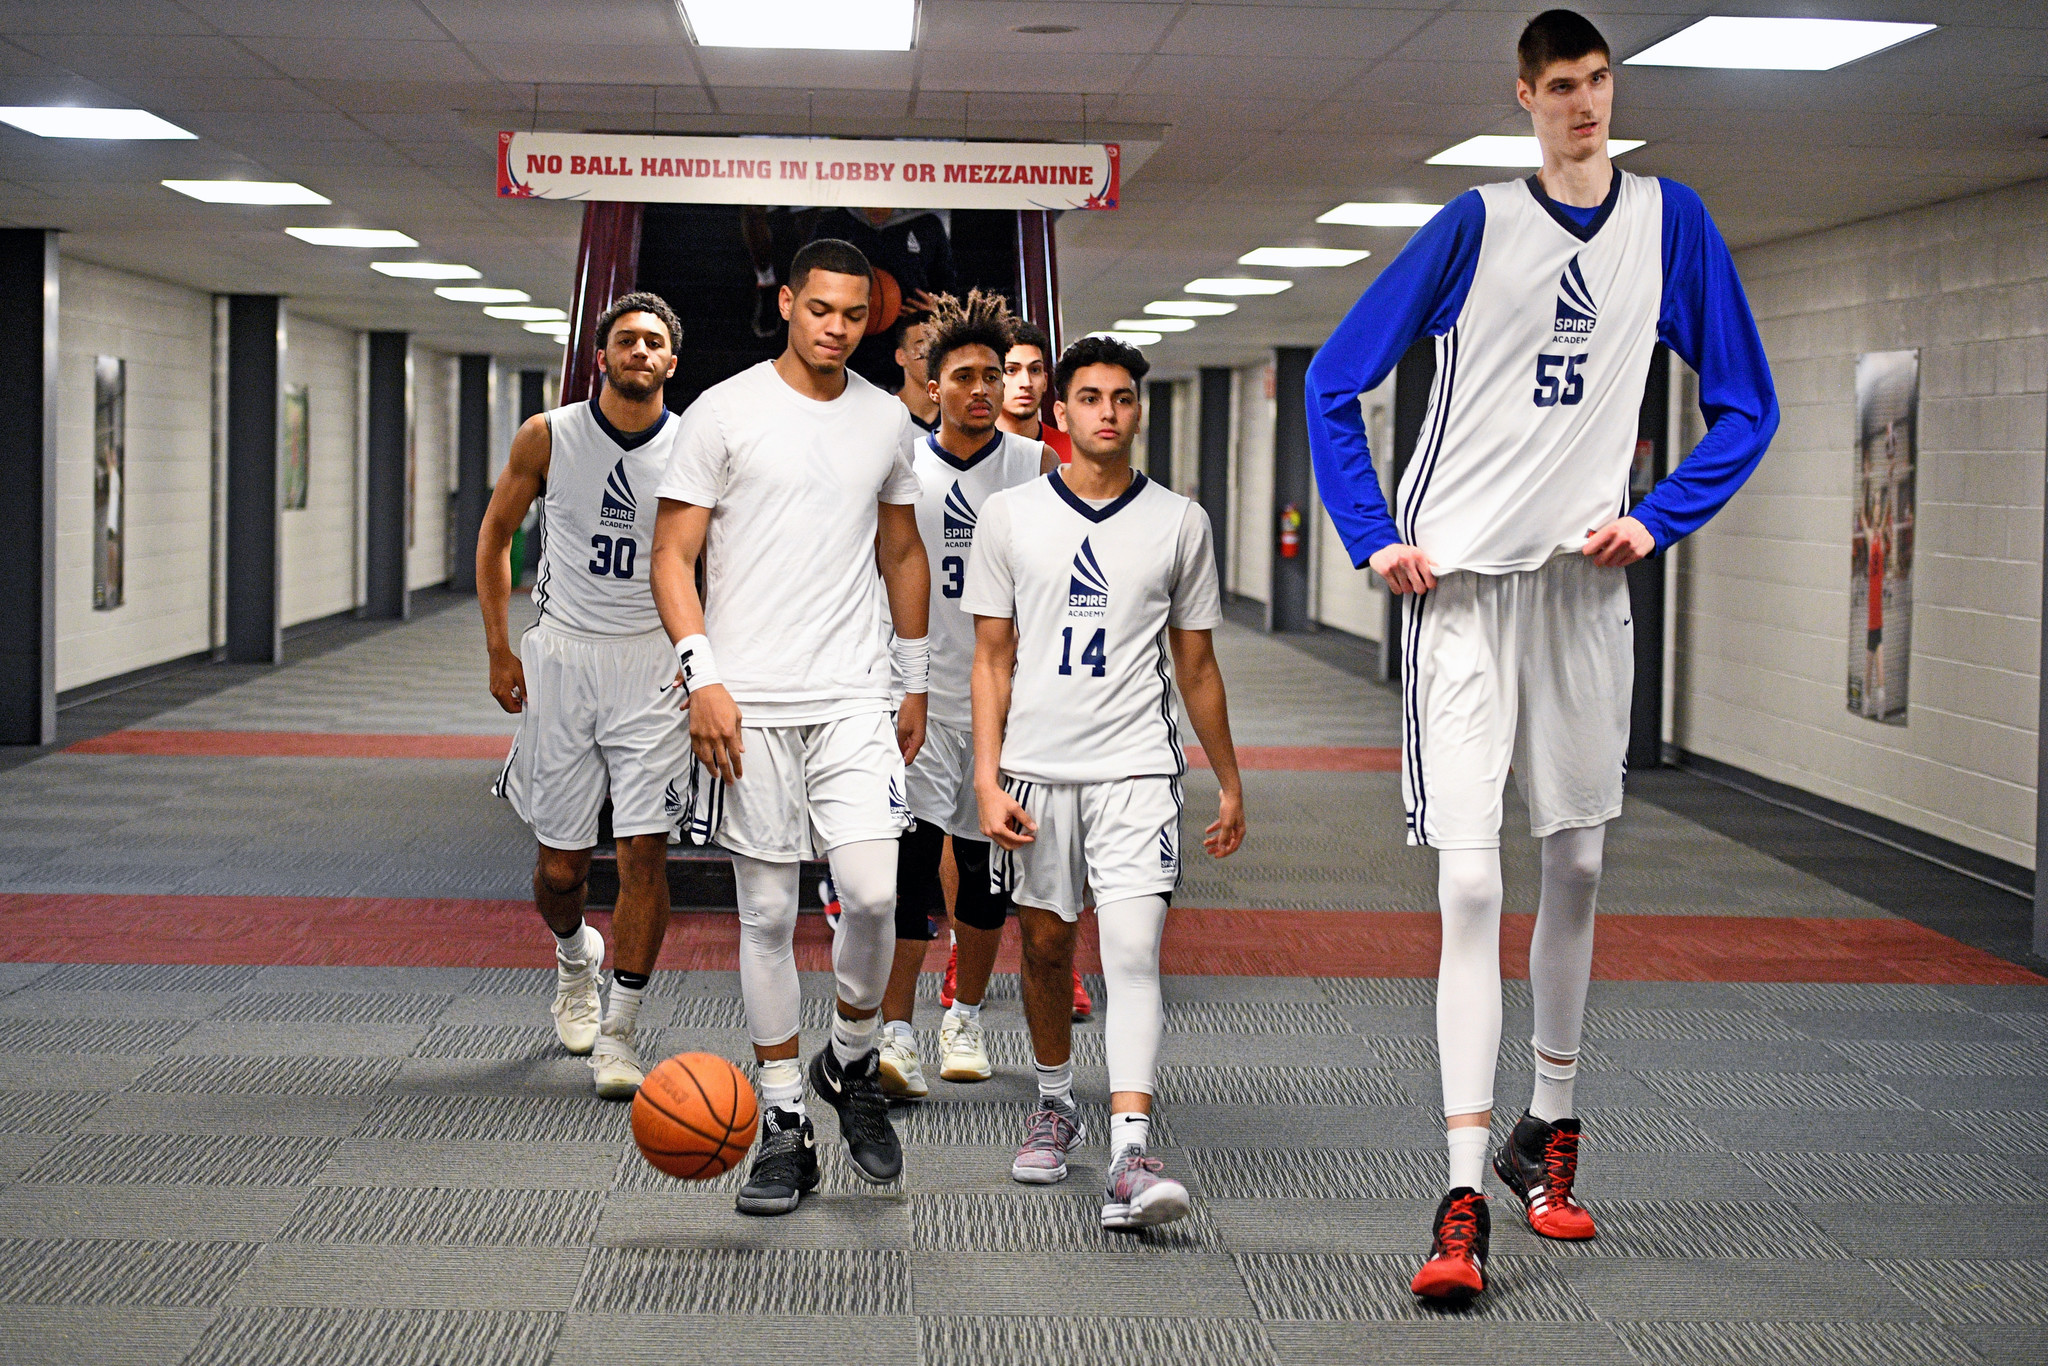 7-foot-7-high-school-basketball-player-a-star-attraction-despite-rarely-playing-chicago-tribune